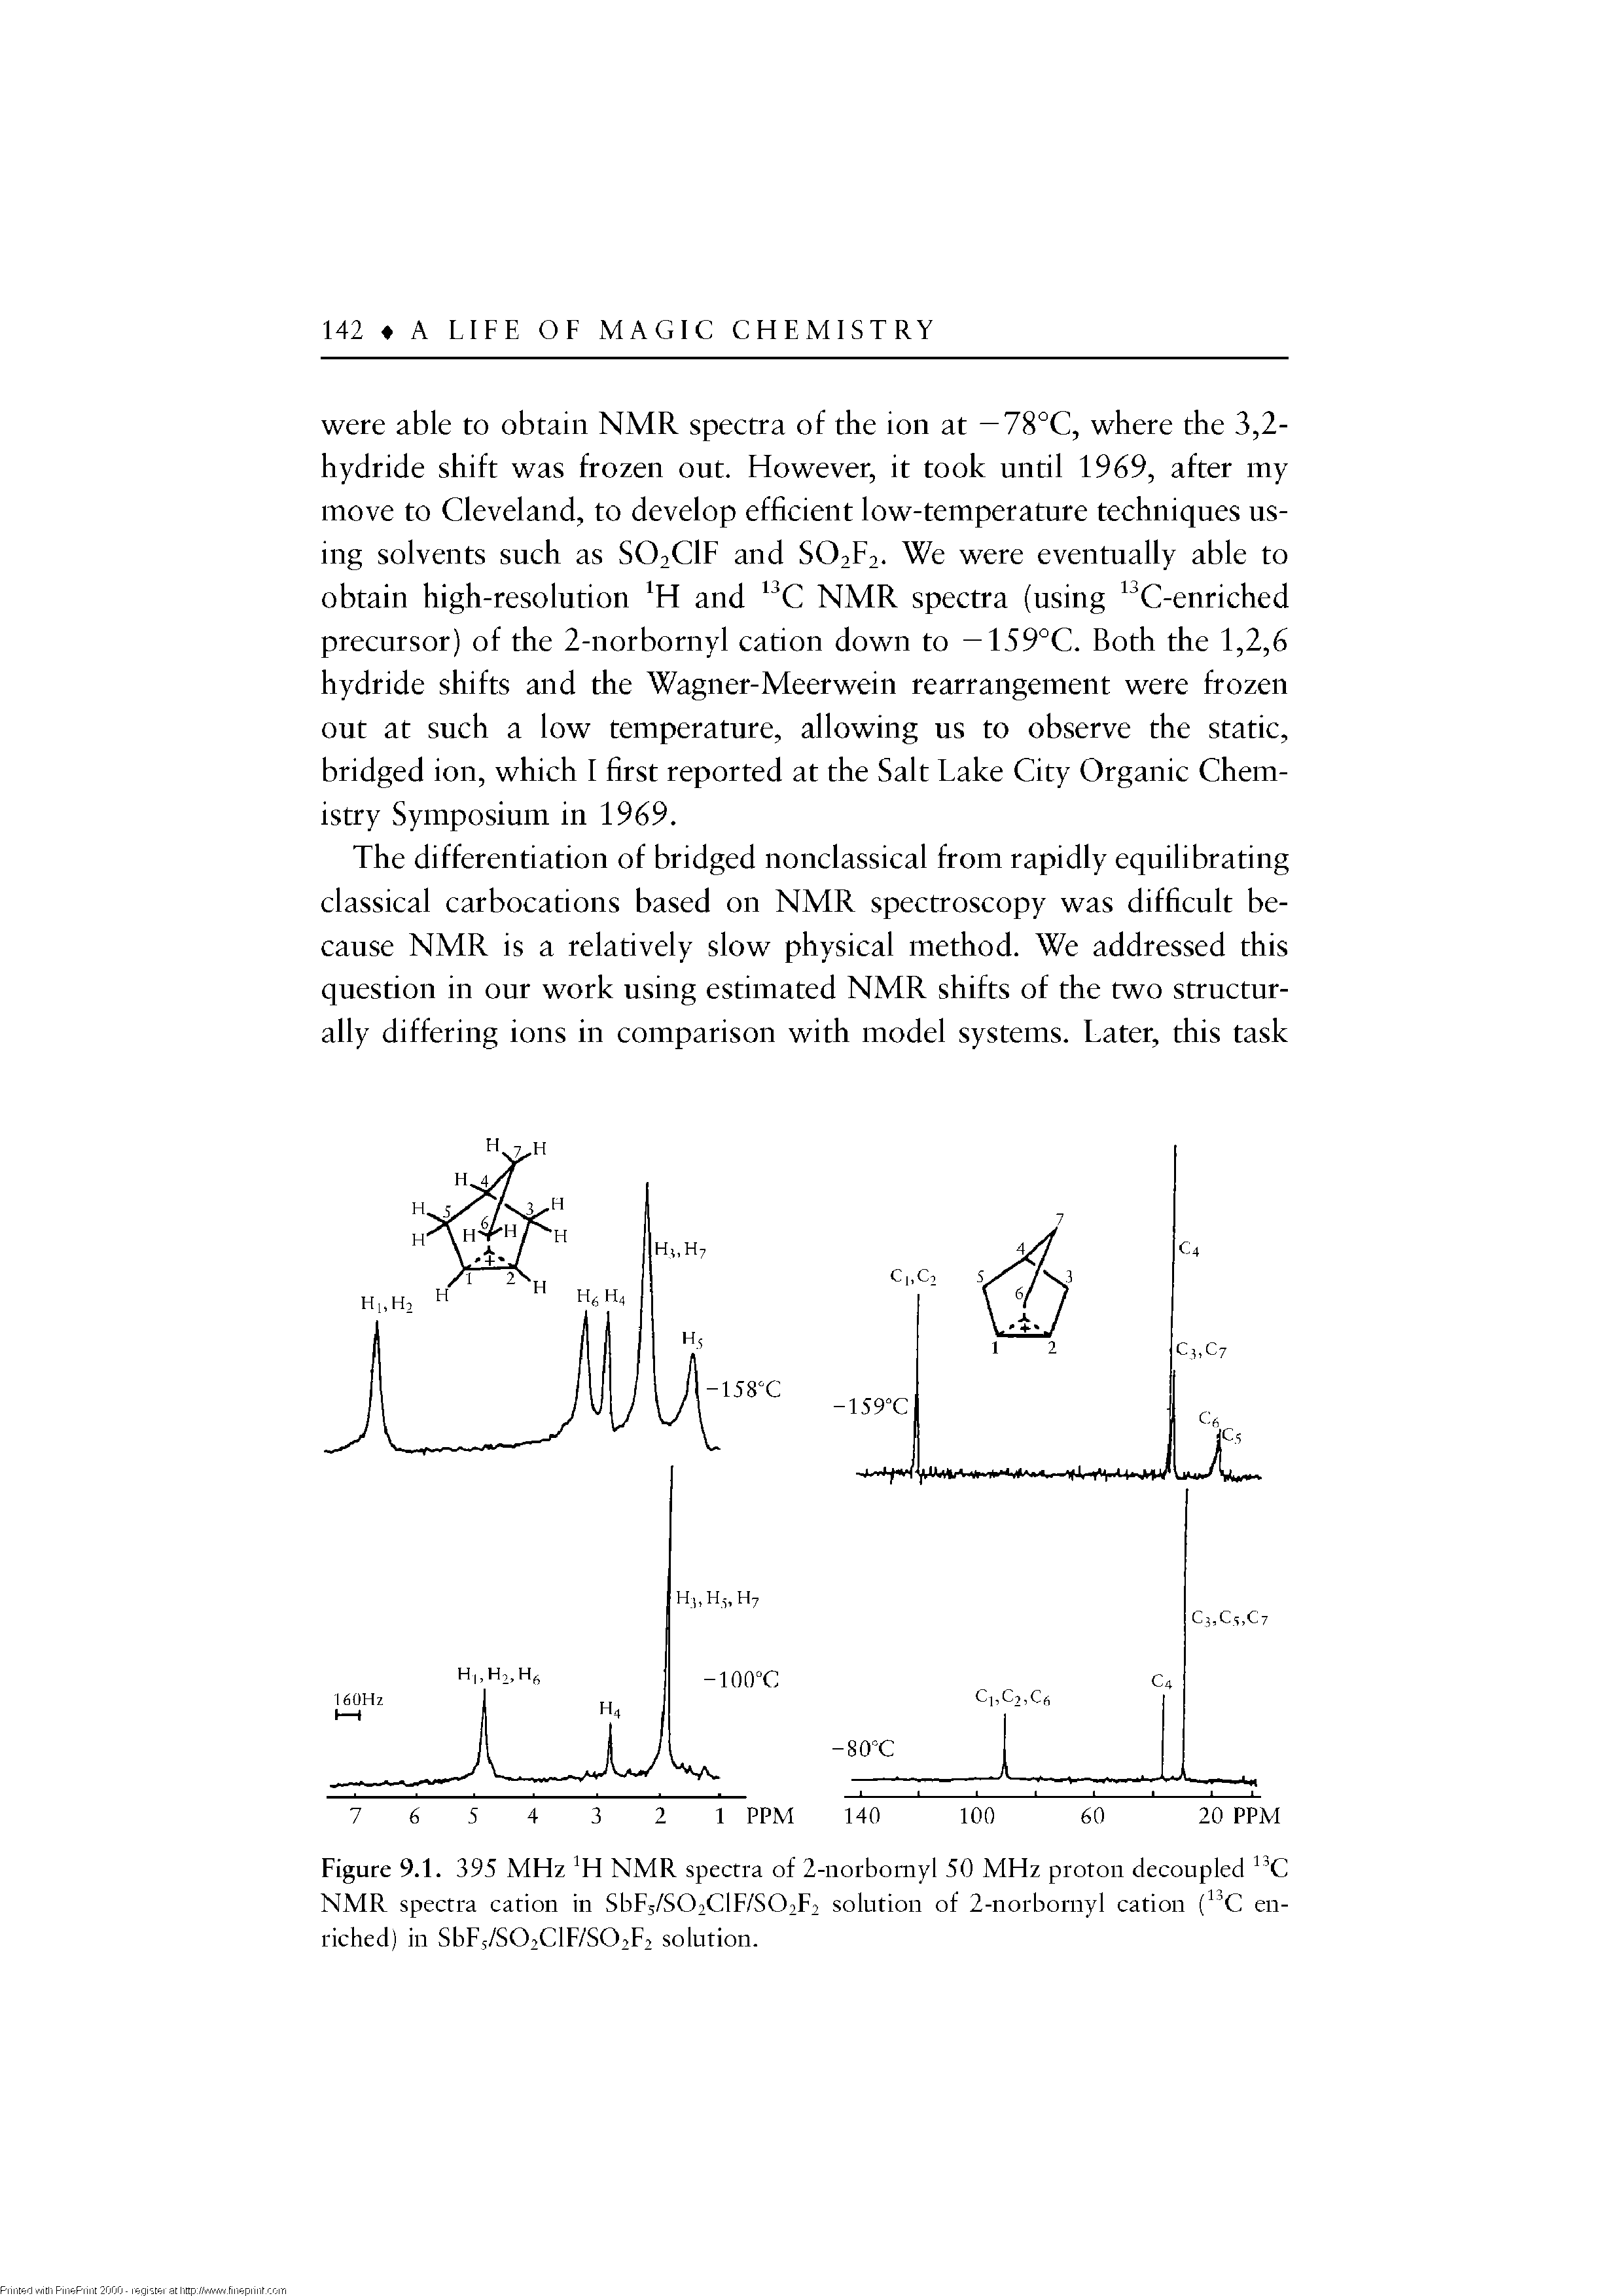 Figure 9.1. 395 MHz M NMR spectra of 2-iiorbornyl 50 MHz proton decoupled C NMR spectra cation in SbF5/S02CIF/S02F2 solution of 2-norbornyl cation ( C enriched) in SbF5/S02ClF/S02F2 solution.